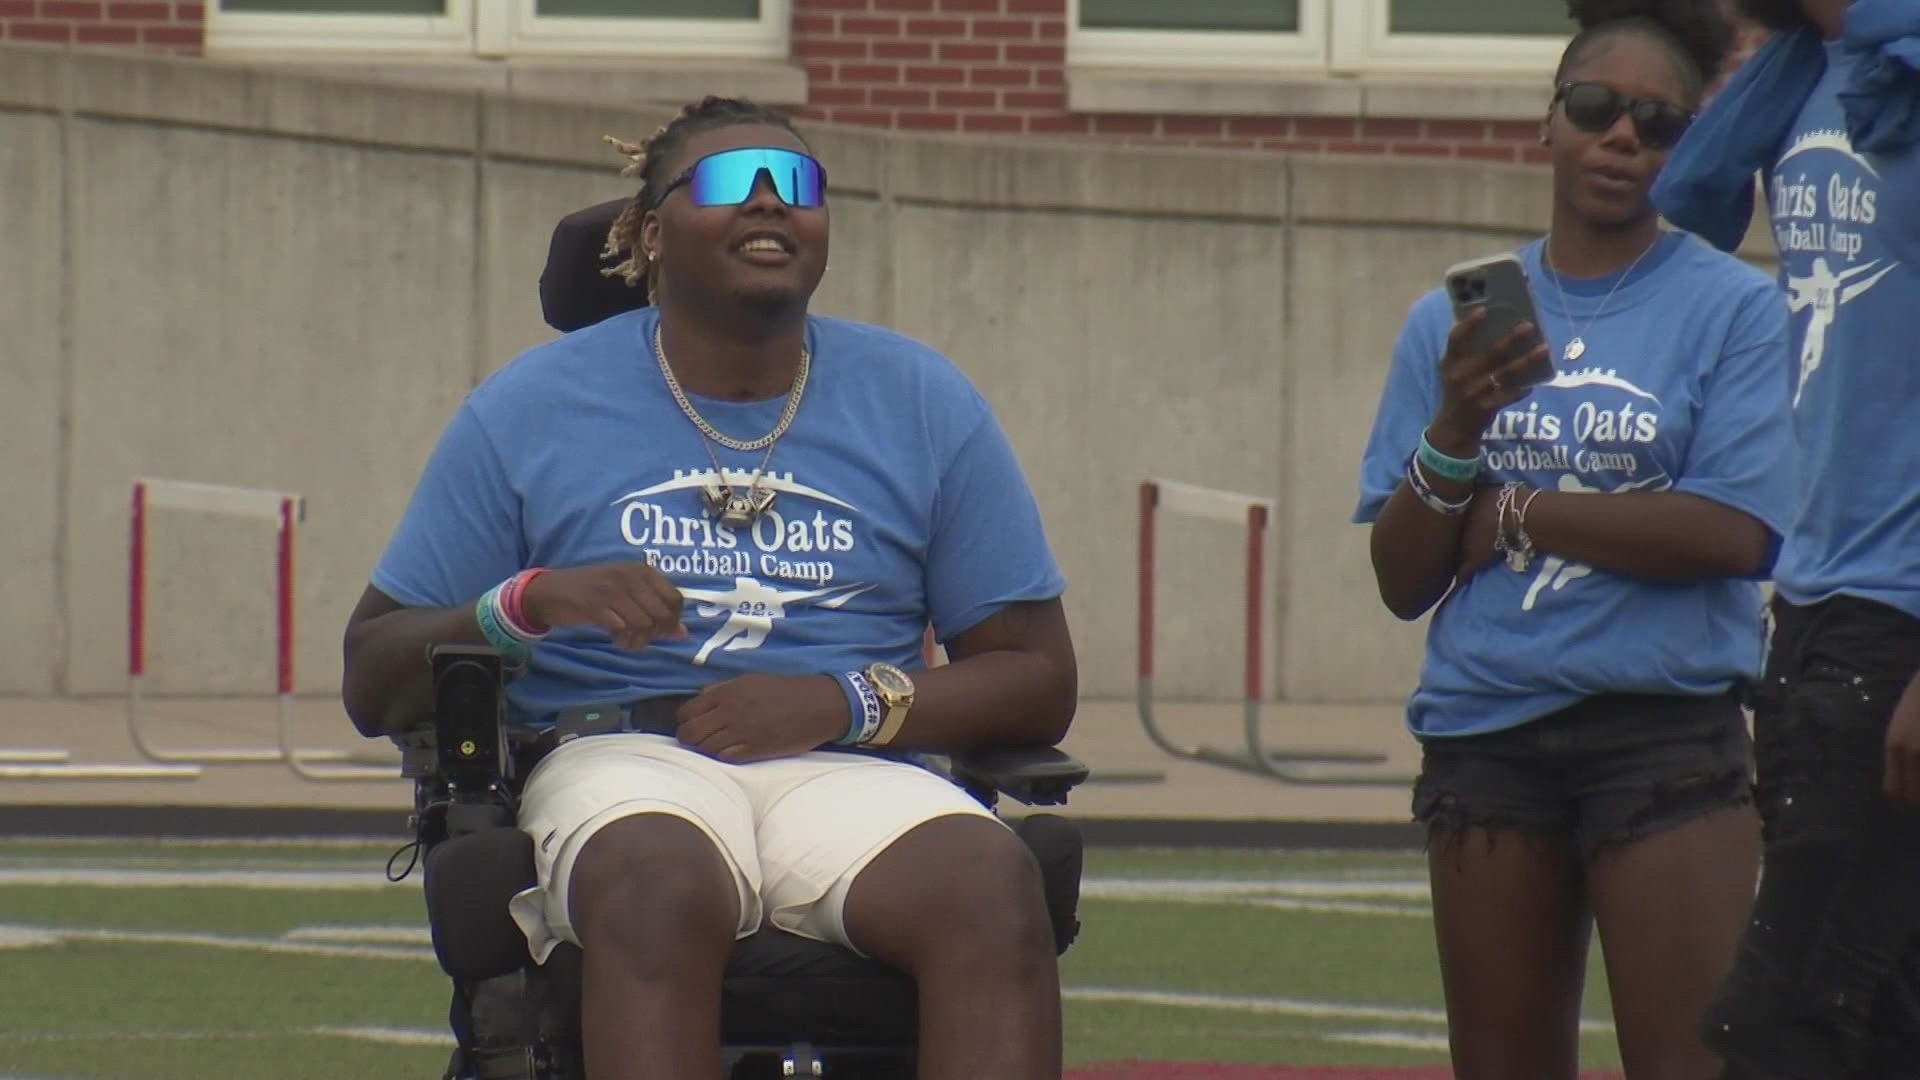 Chris Oates, who suffered a stroke in 2020, continues to give back the community with a special football camp he and current players hosted at Beechwood High.